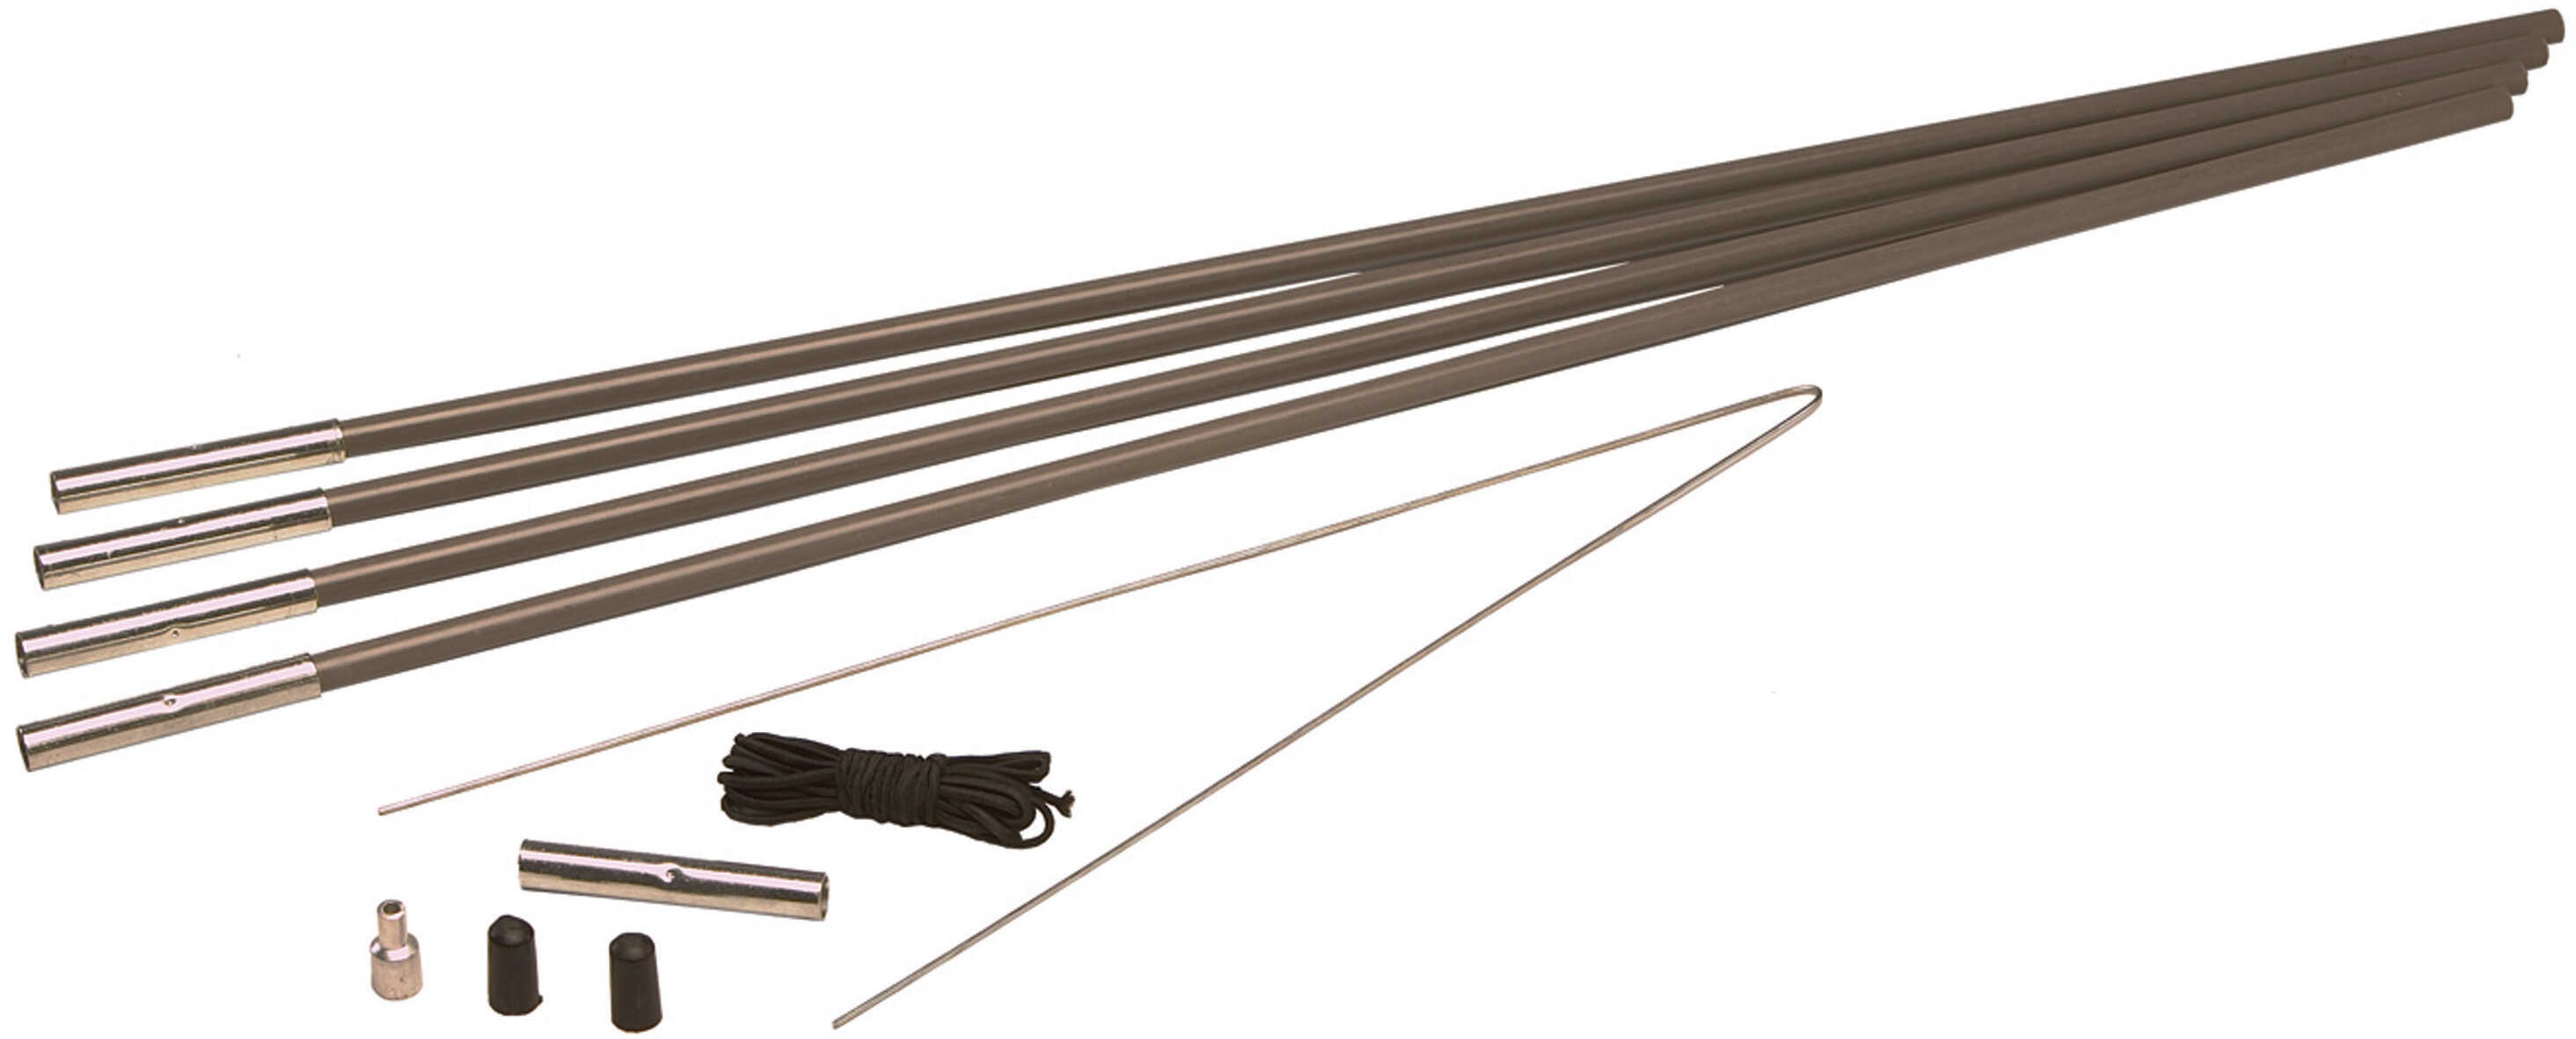 Texsport Tent Pole Replacement Kit - 5/16In DIA